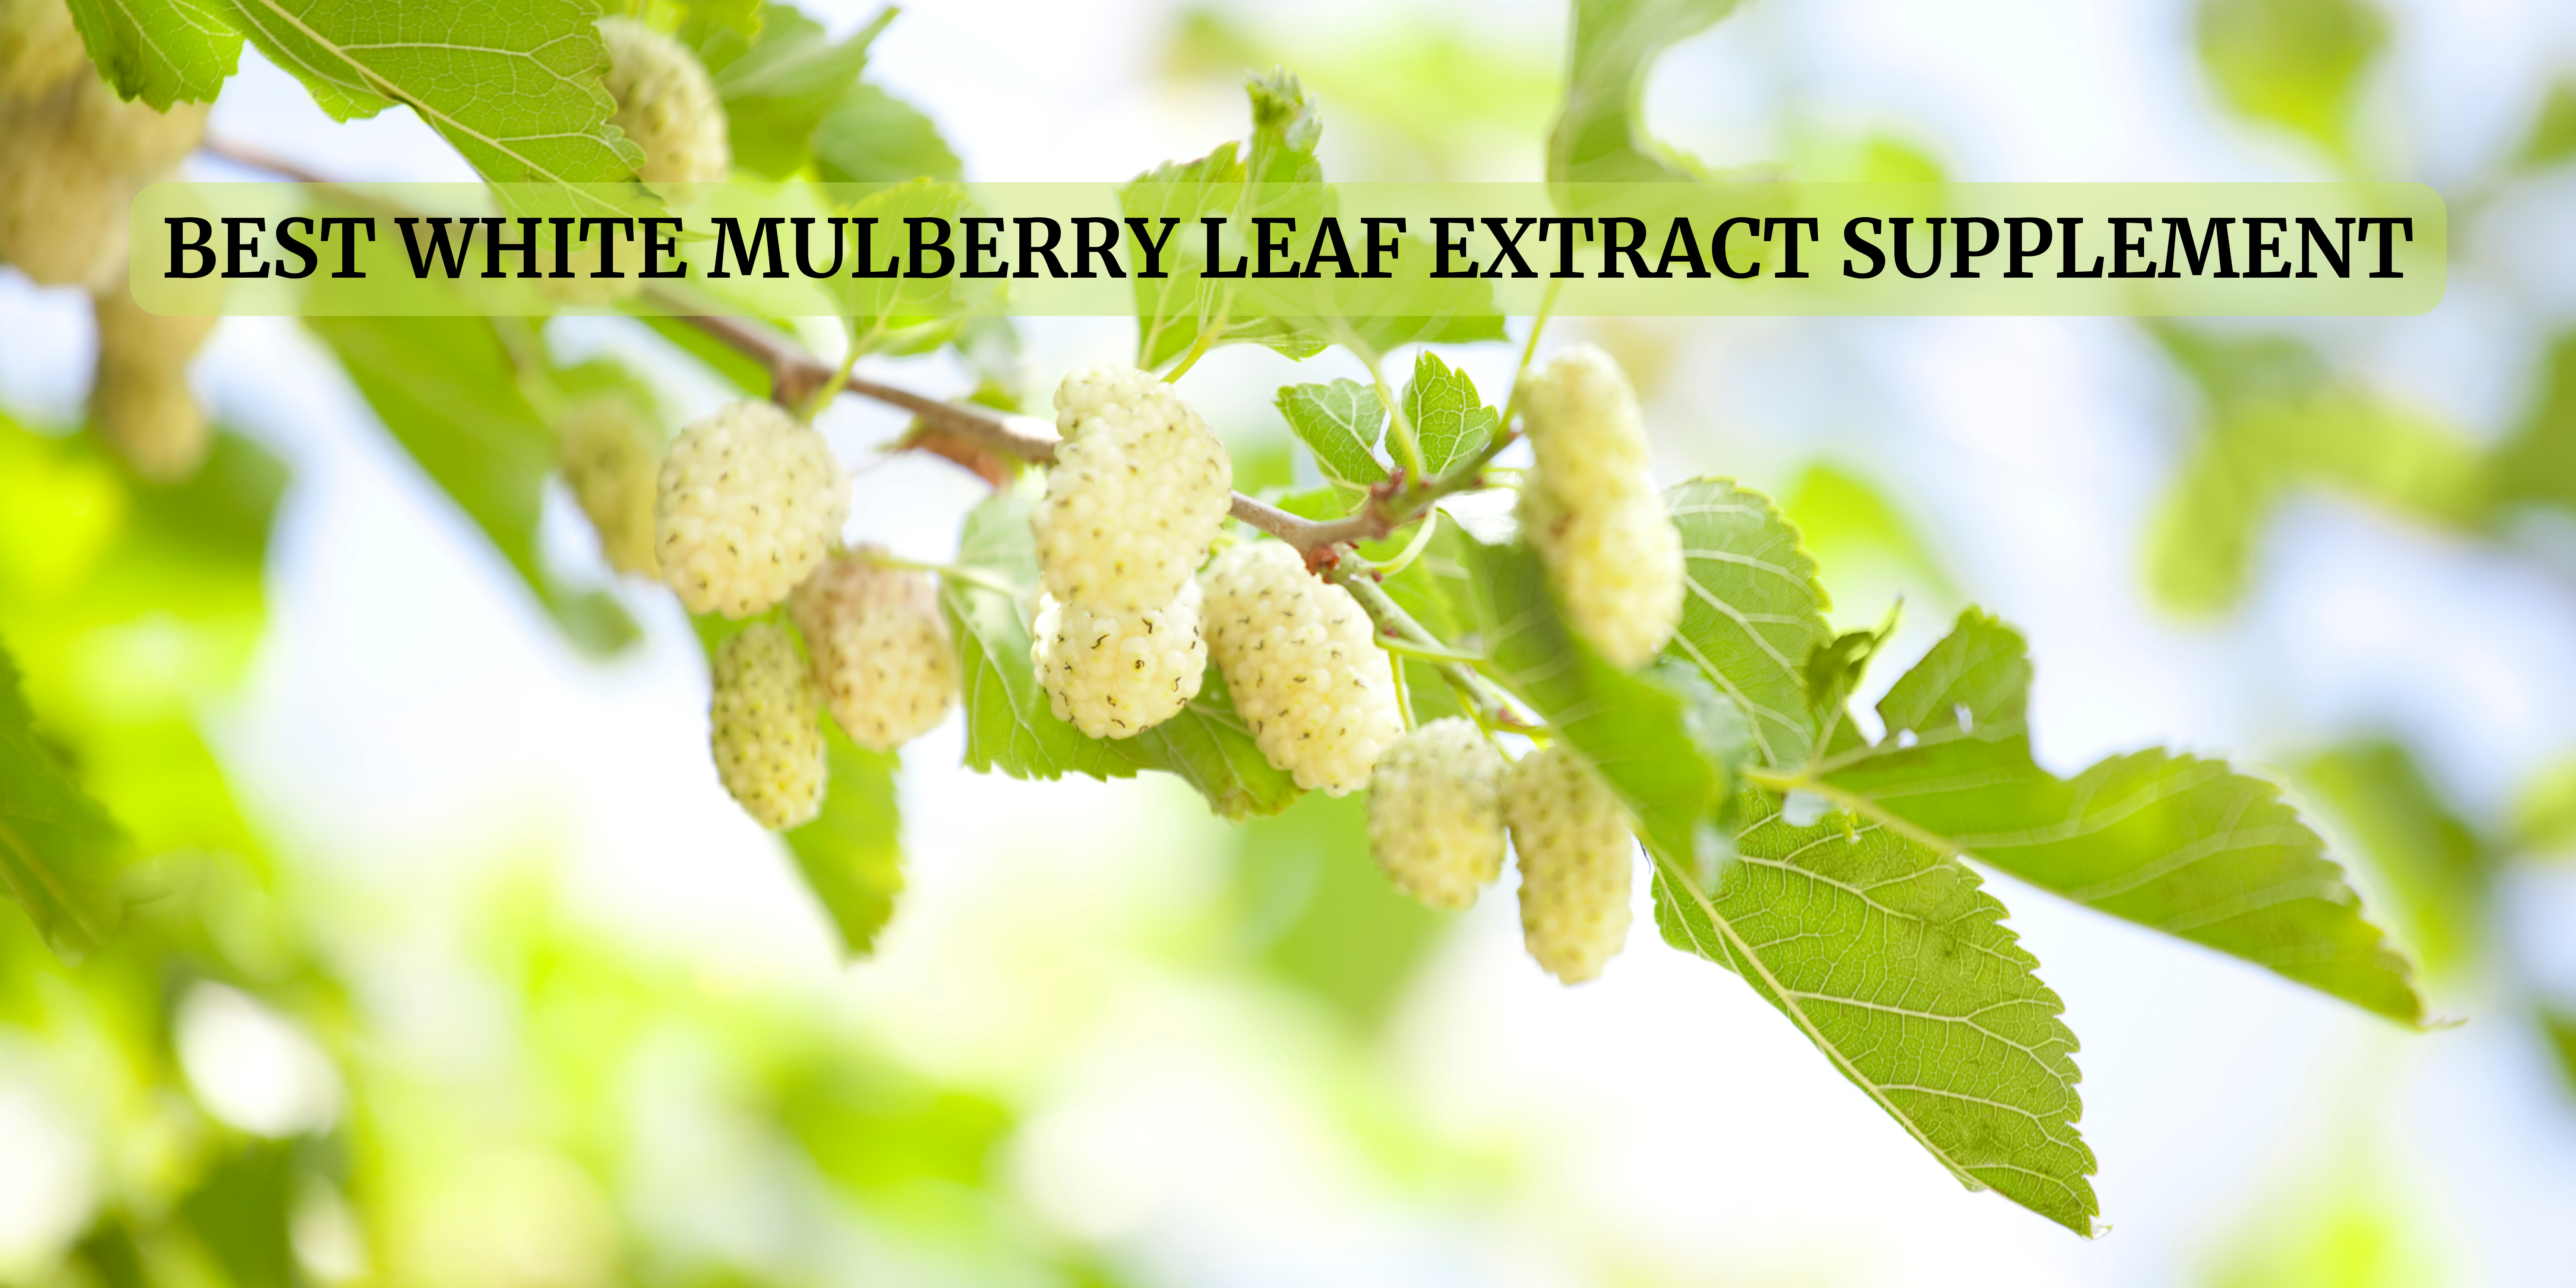 white mulberry leaf extract supplement in USA